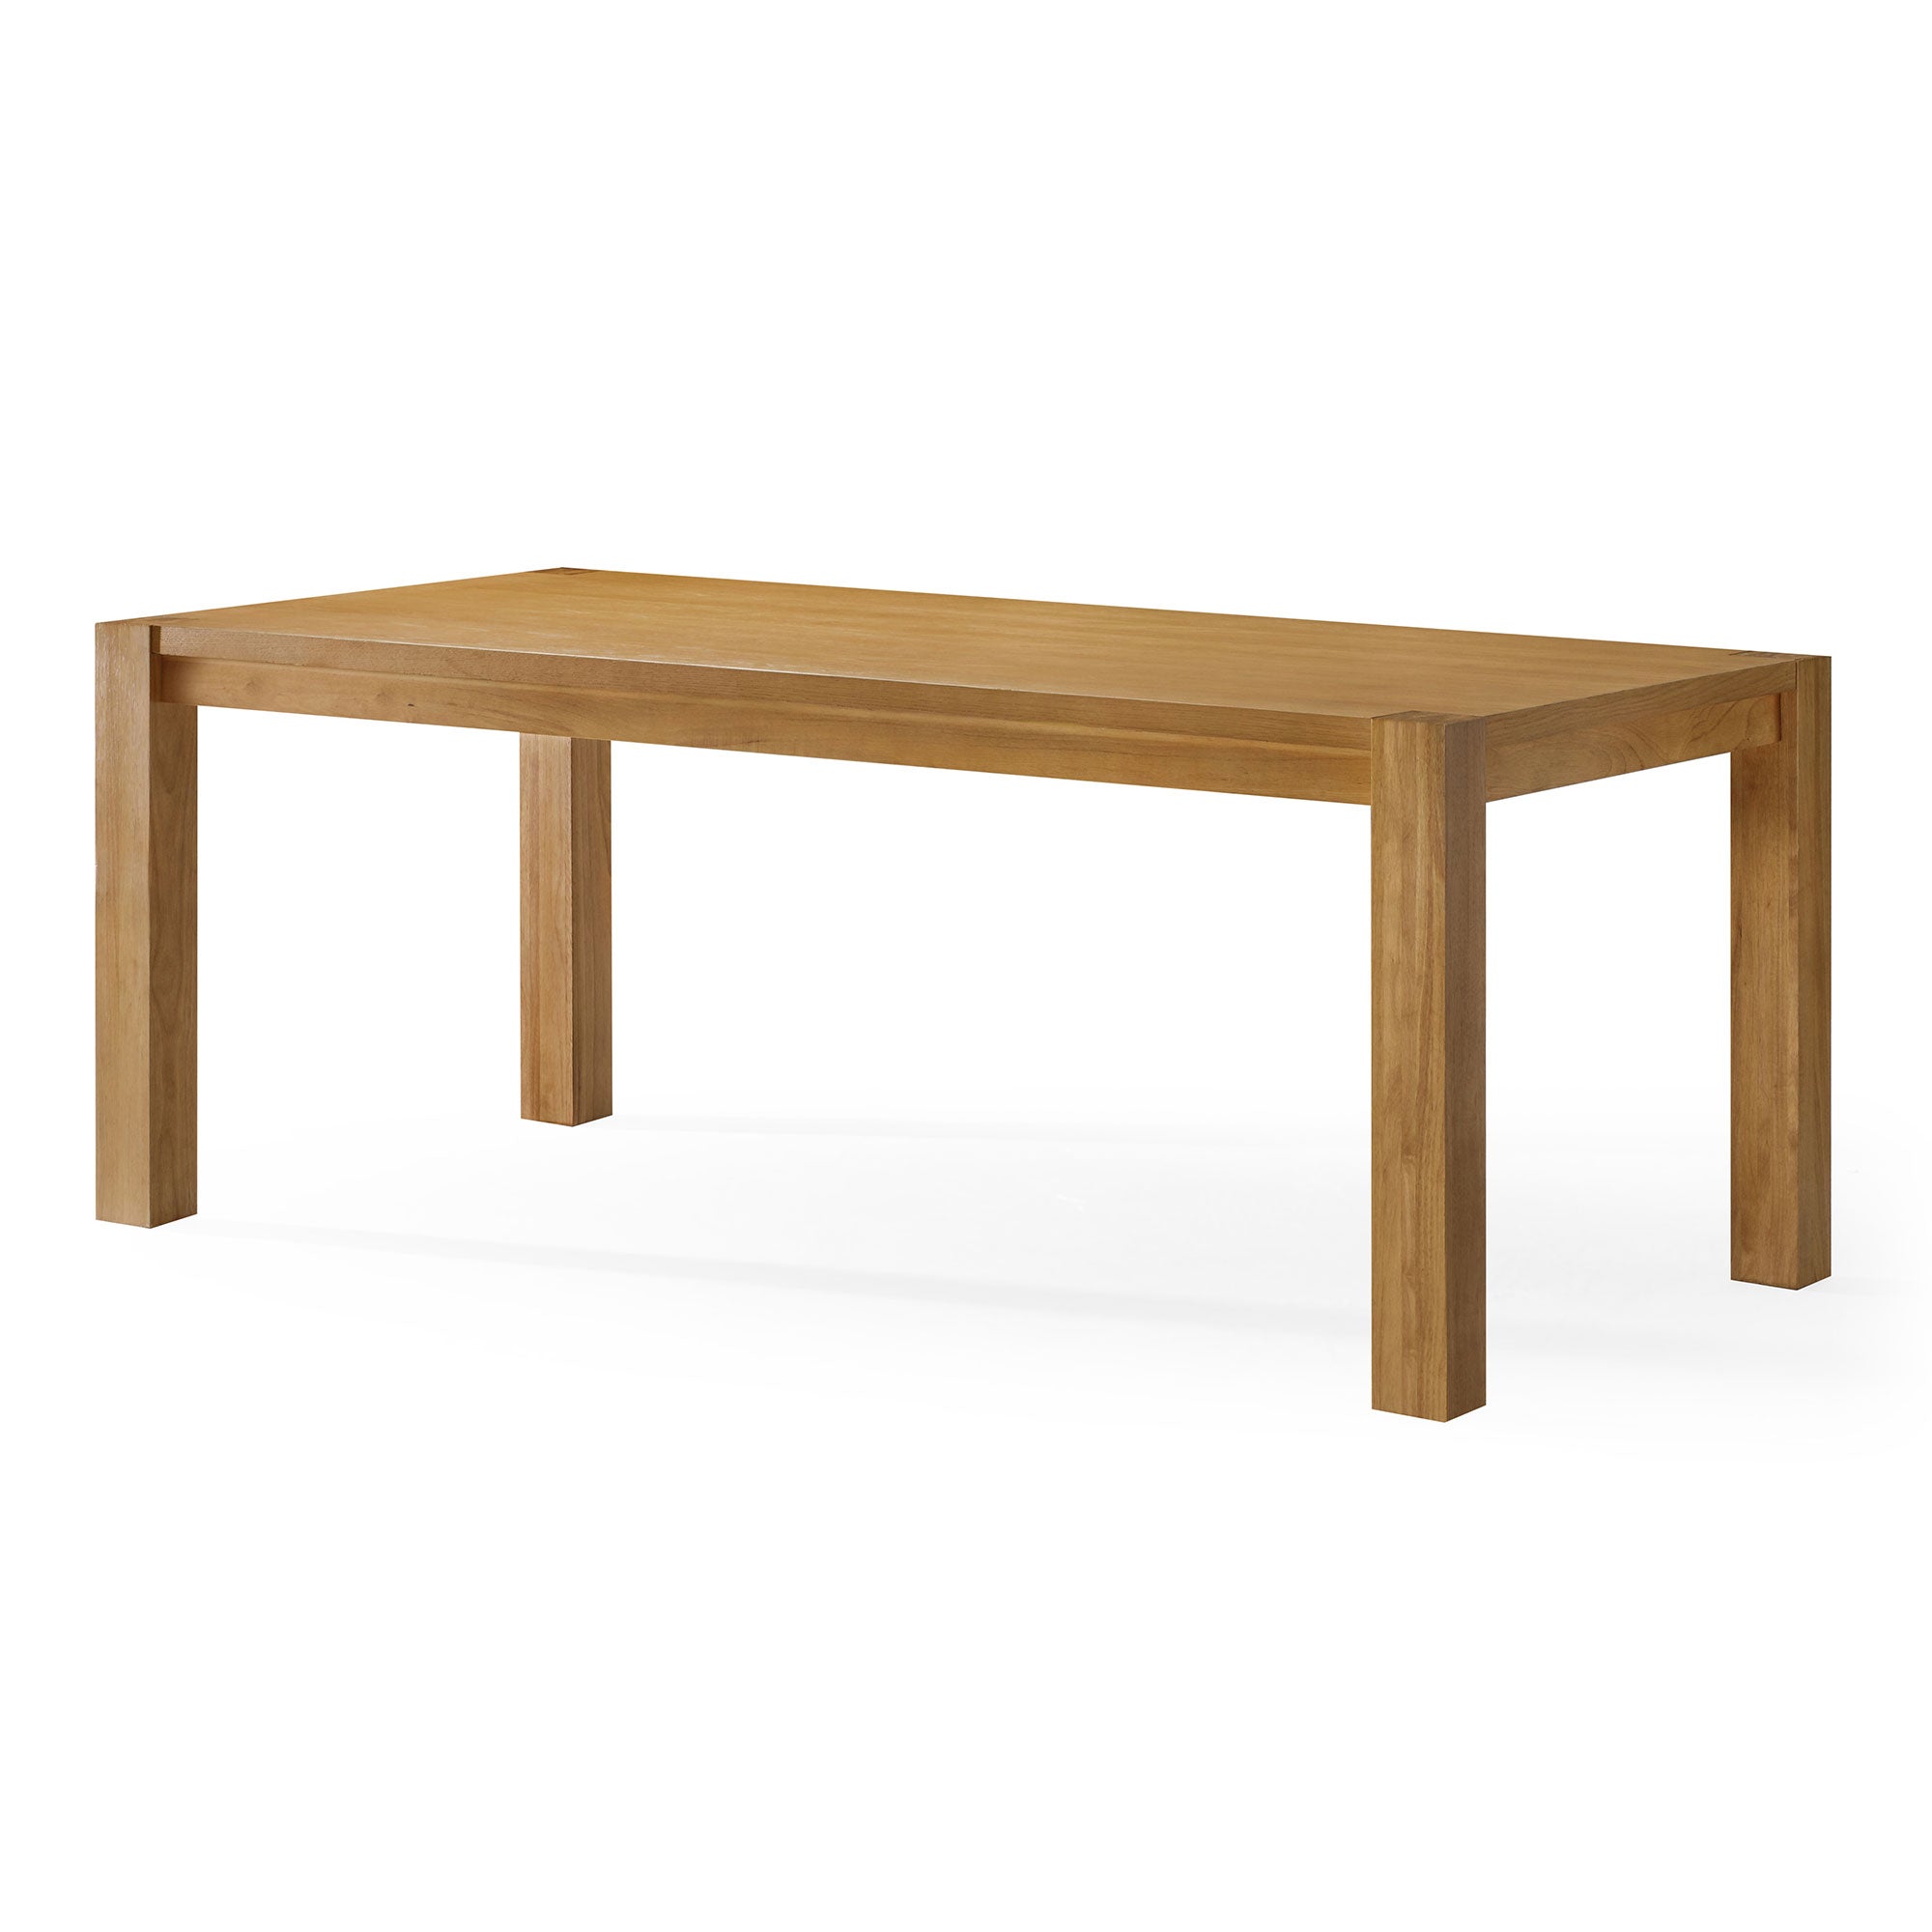 Maven-Lane-Cleo-Contemporary-Wooden-Dining-Table-in-Refined-Natural-Finish-Kitchen-&-Dining-Room-Tables